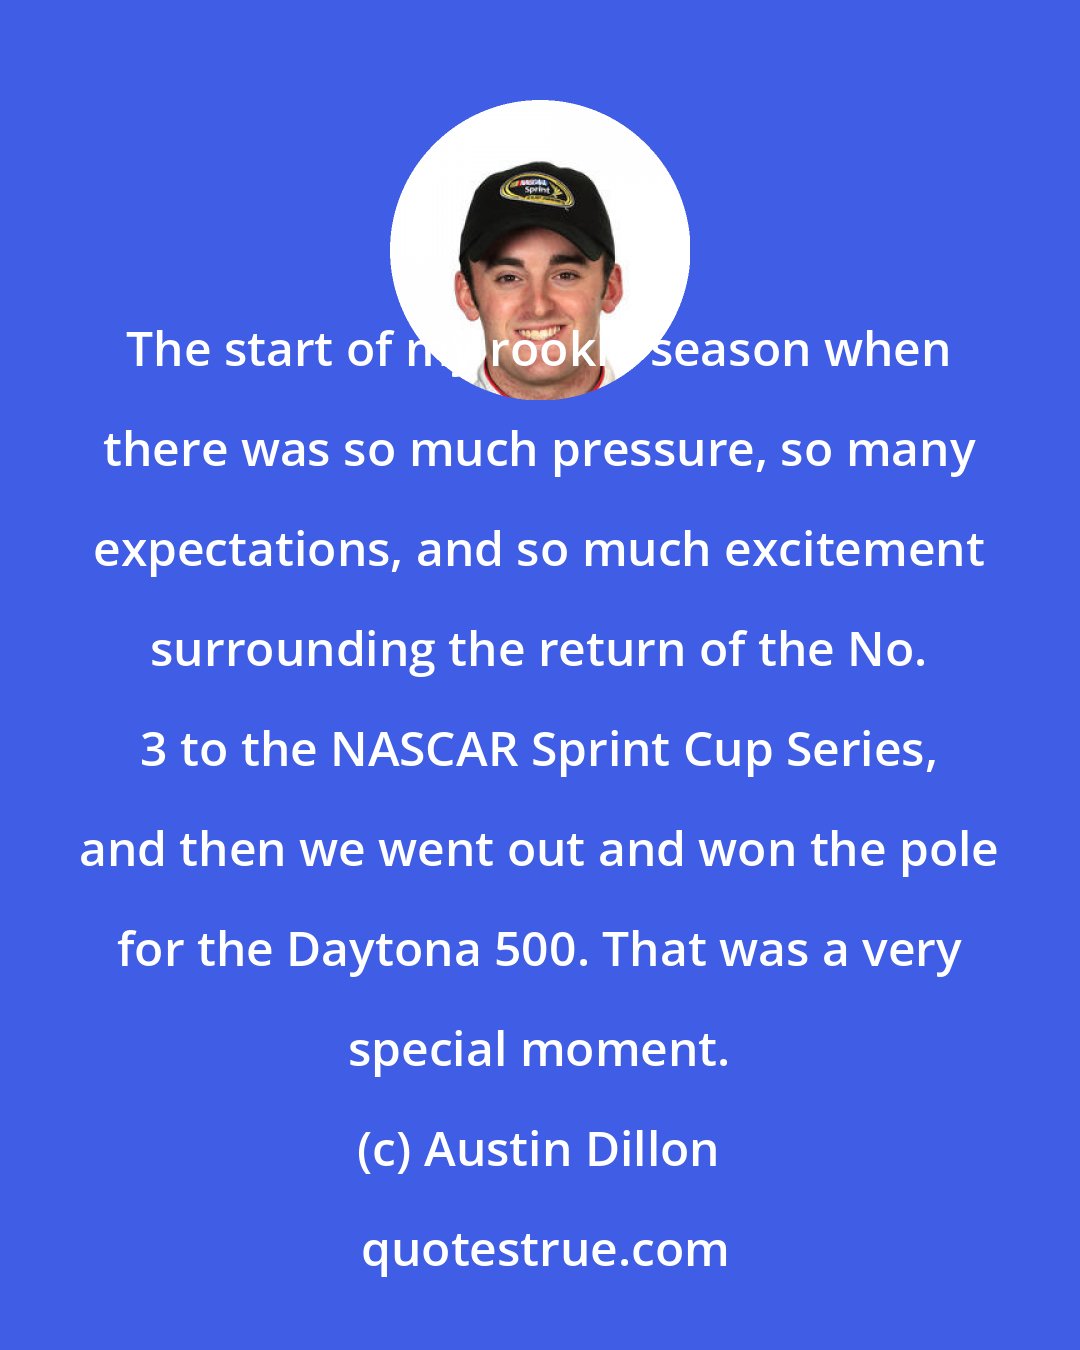 Austin Dillon: The start of my rookie season when there was so much pressure, so many expectations, and so much excitement surrounding the return of the No. 3 to the NASCAR Sprint Cup Series, and then we went out and won the pole for the Daytona 500. That was a very special moment.